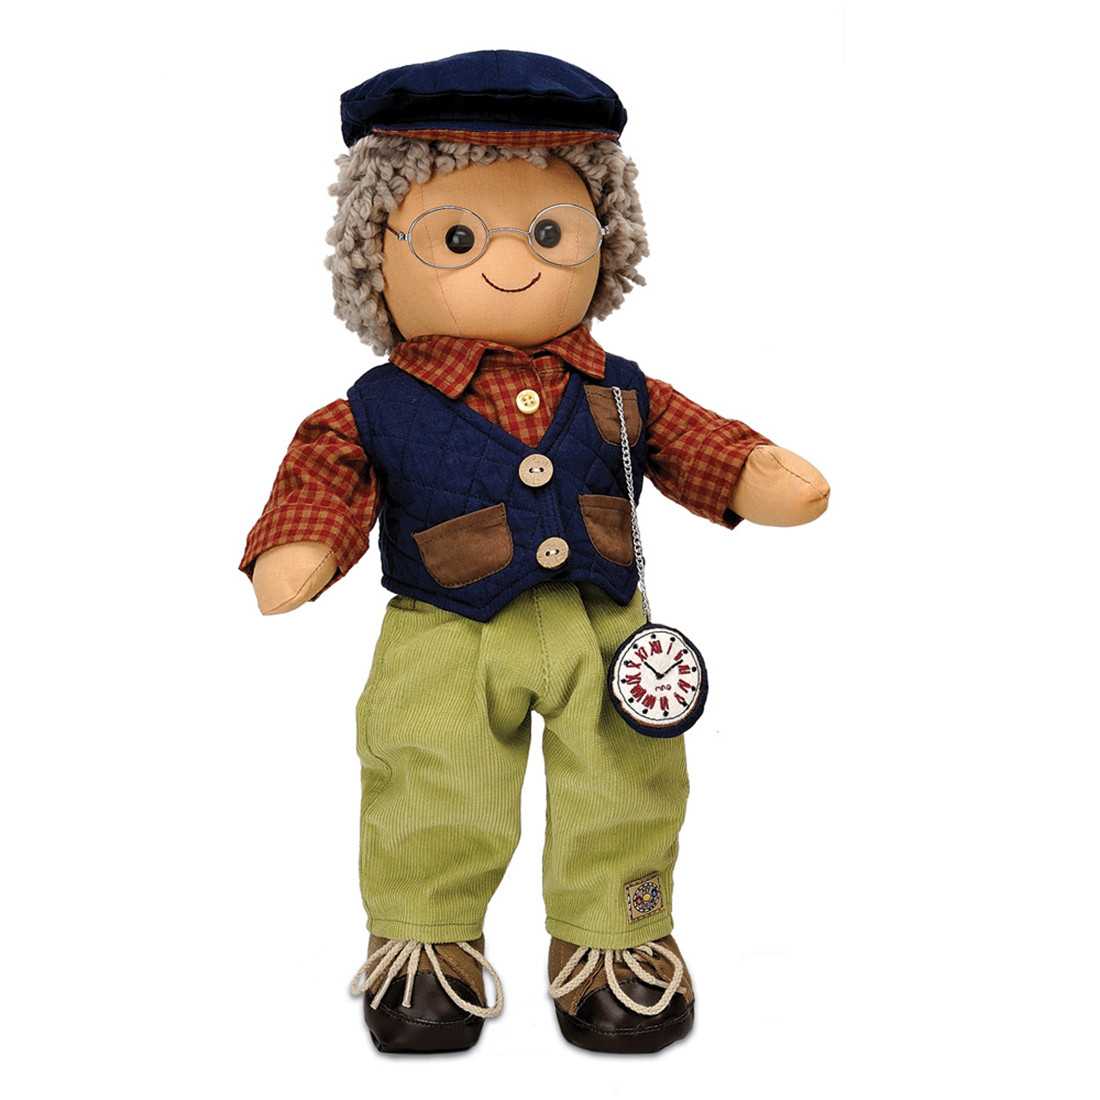 Bambolo My Doll Geppetto shop online